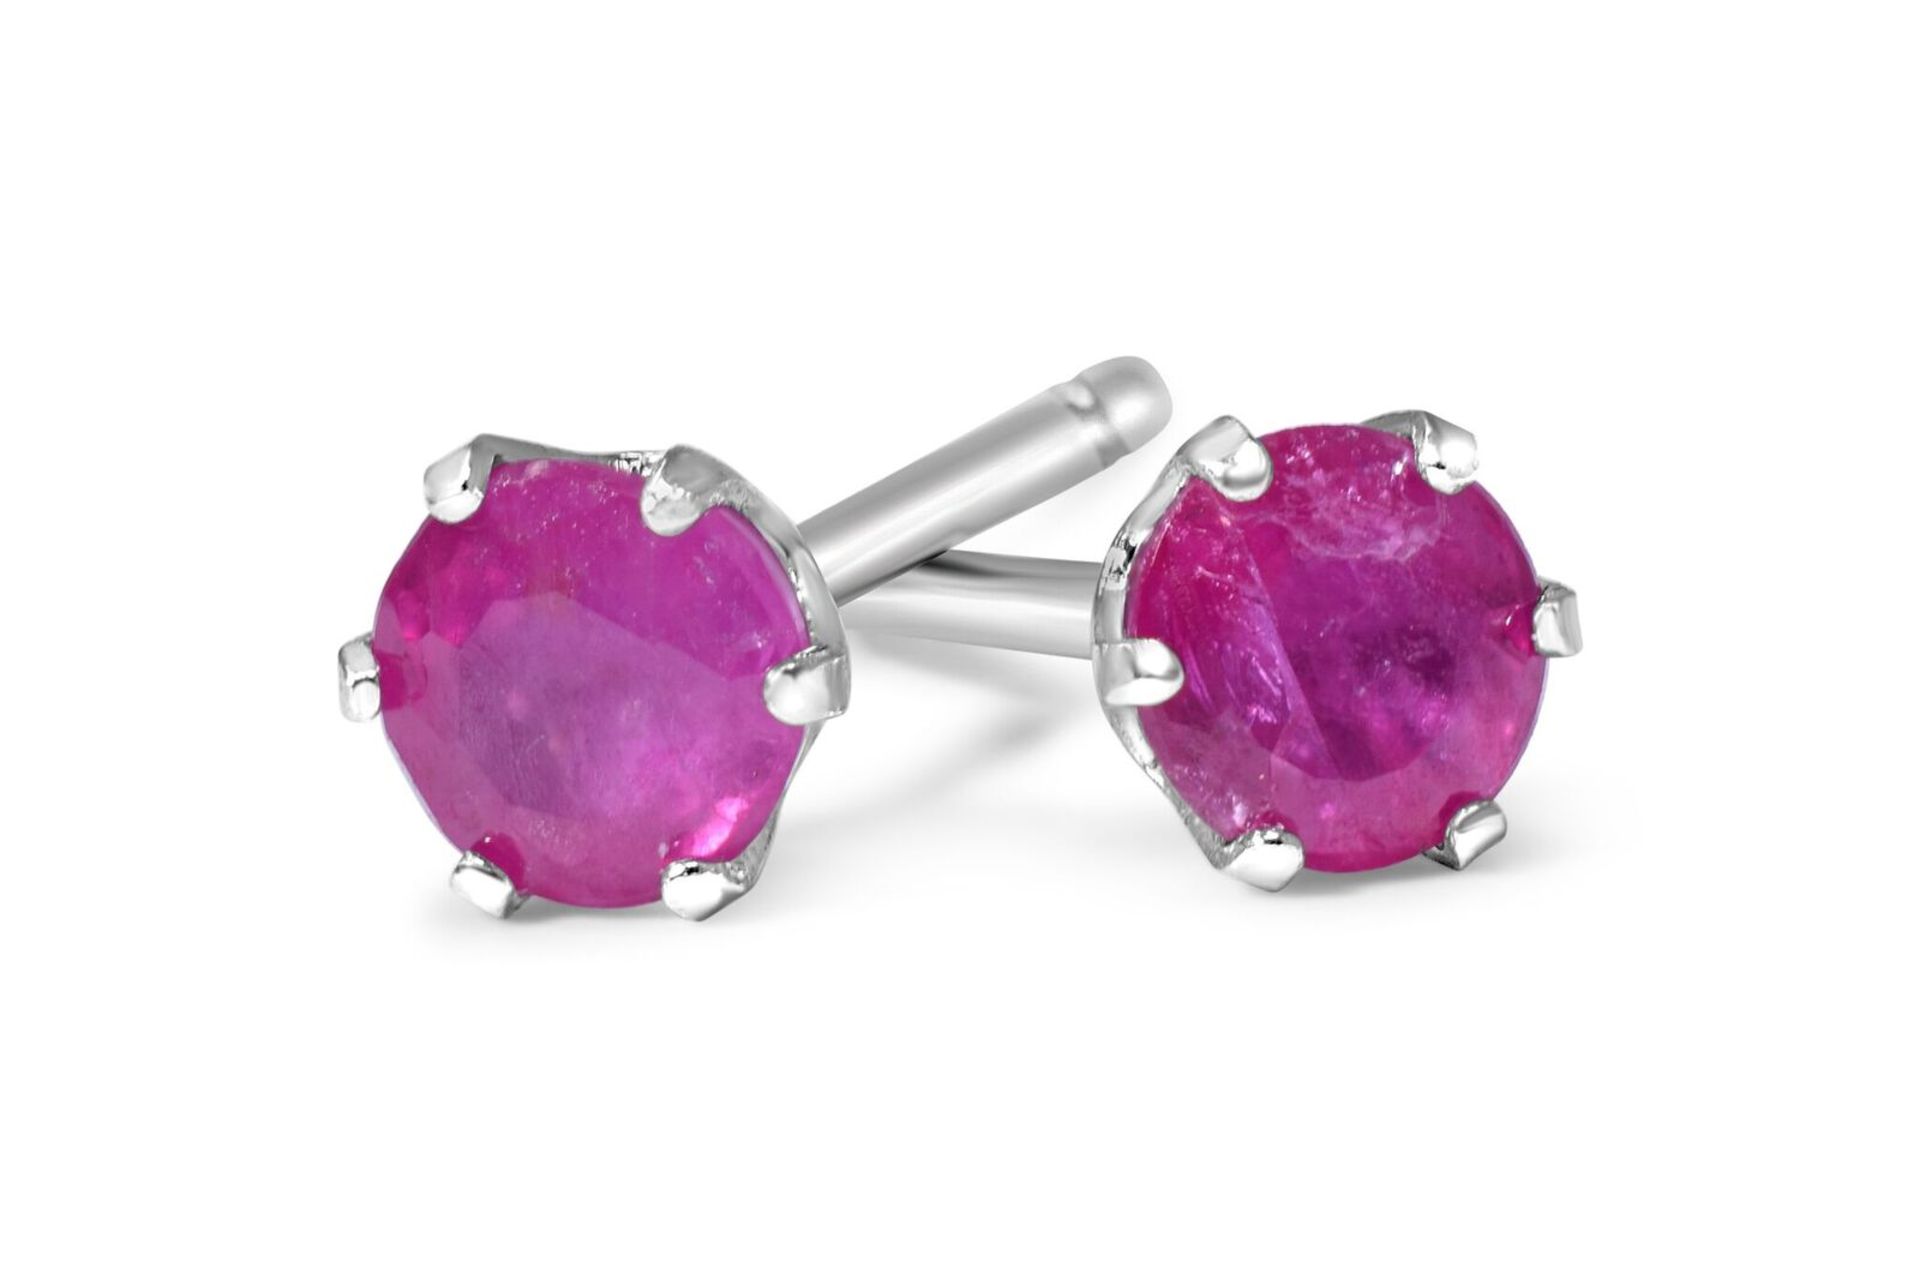 Ruby Stud Earrings, Platinum 900 RRP £249 Weight 0.15g, Diamond Weight 0.45ct, Size 3mm (RUBY3MM)( - Image 2 of 2